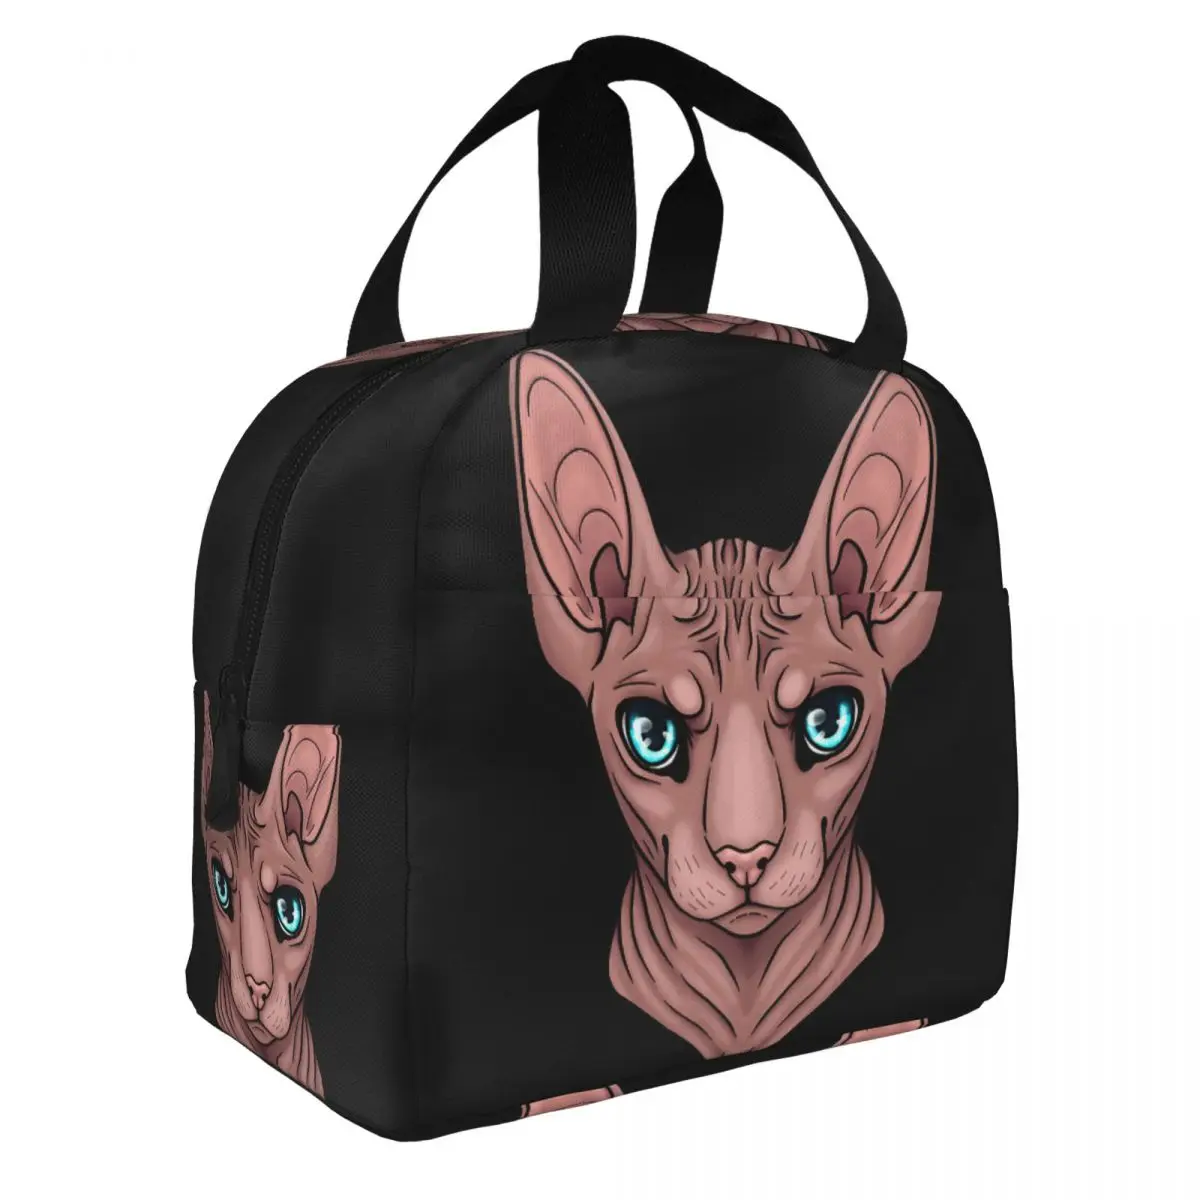 Sphynx Head Lunch Bento Bags Portable Aluminum Foil thickened Thermal Cloth Lunch Bag for Women Men Boy